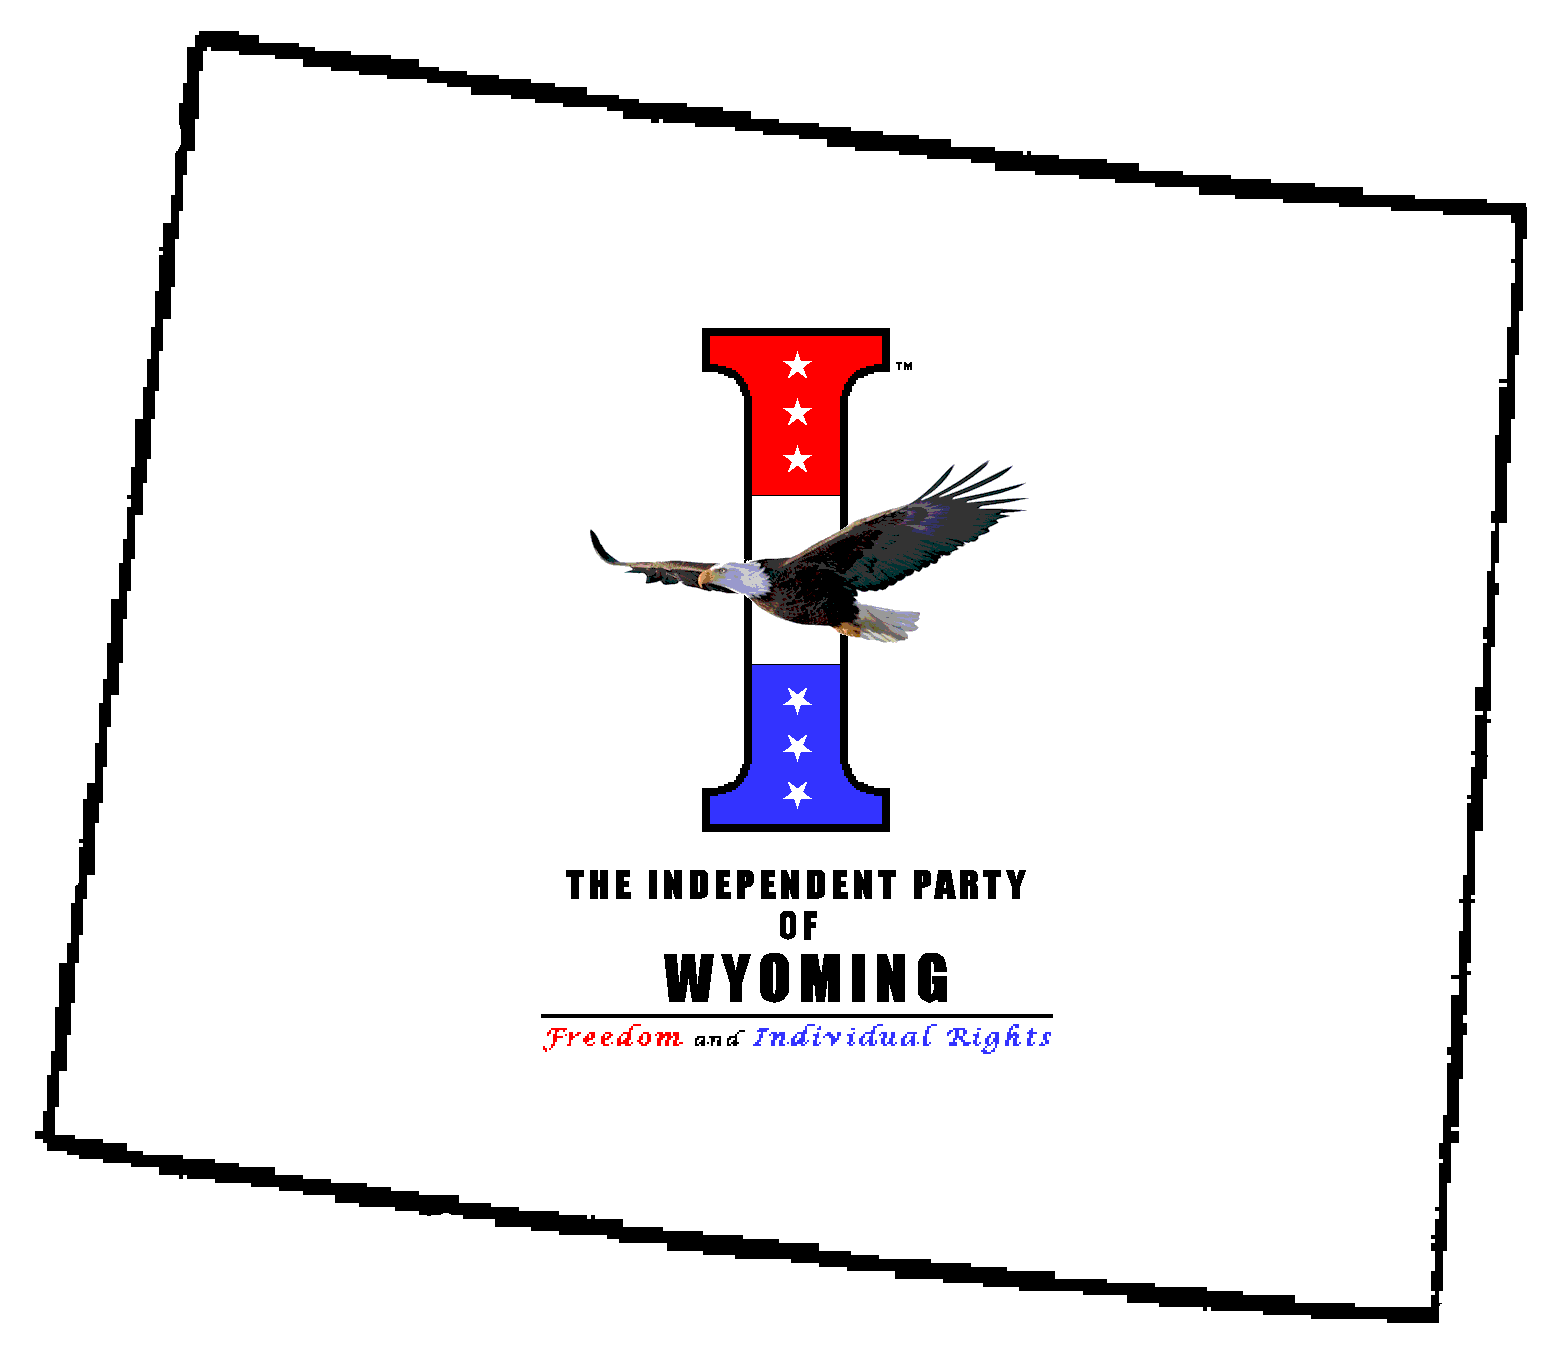 The Independent Party of Wyoming!